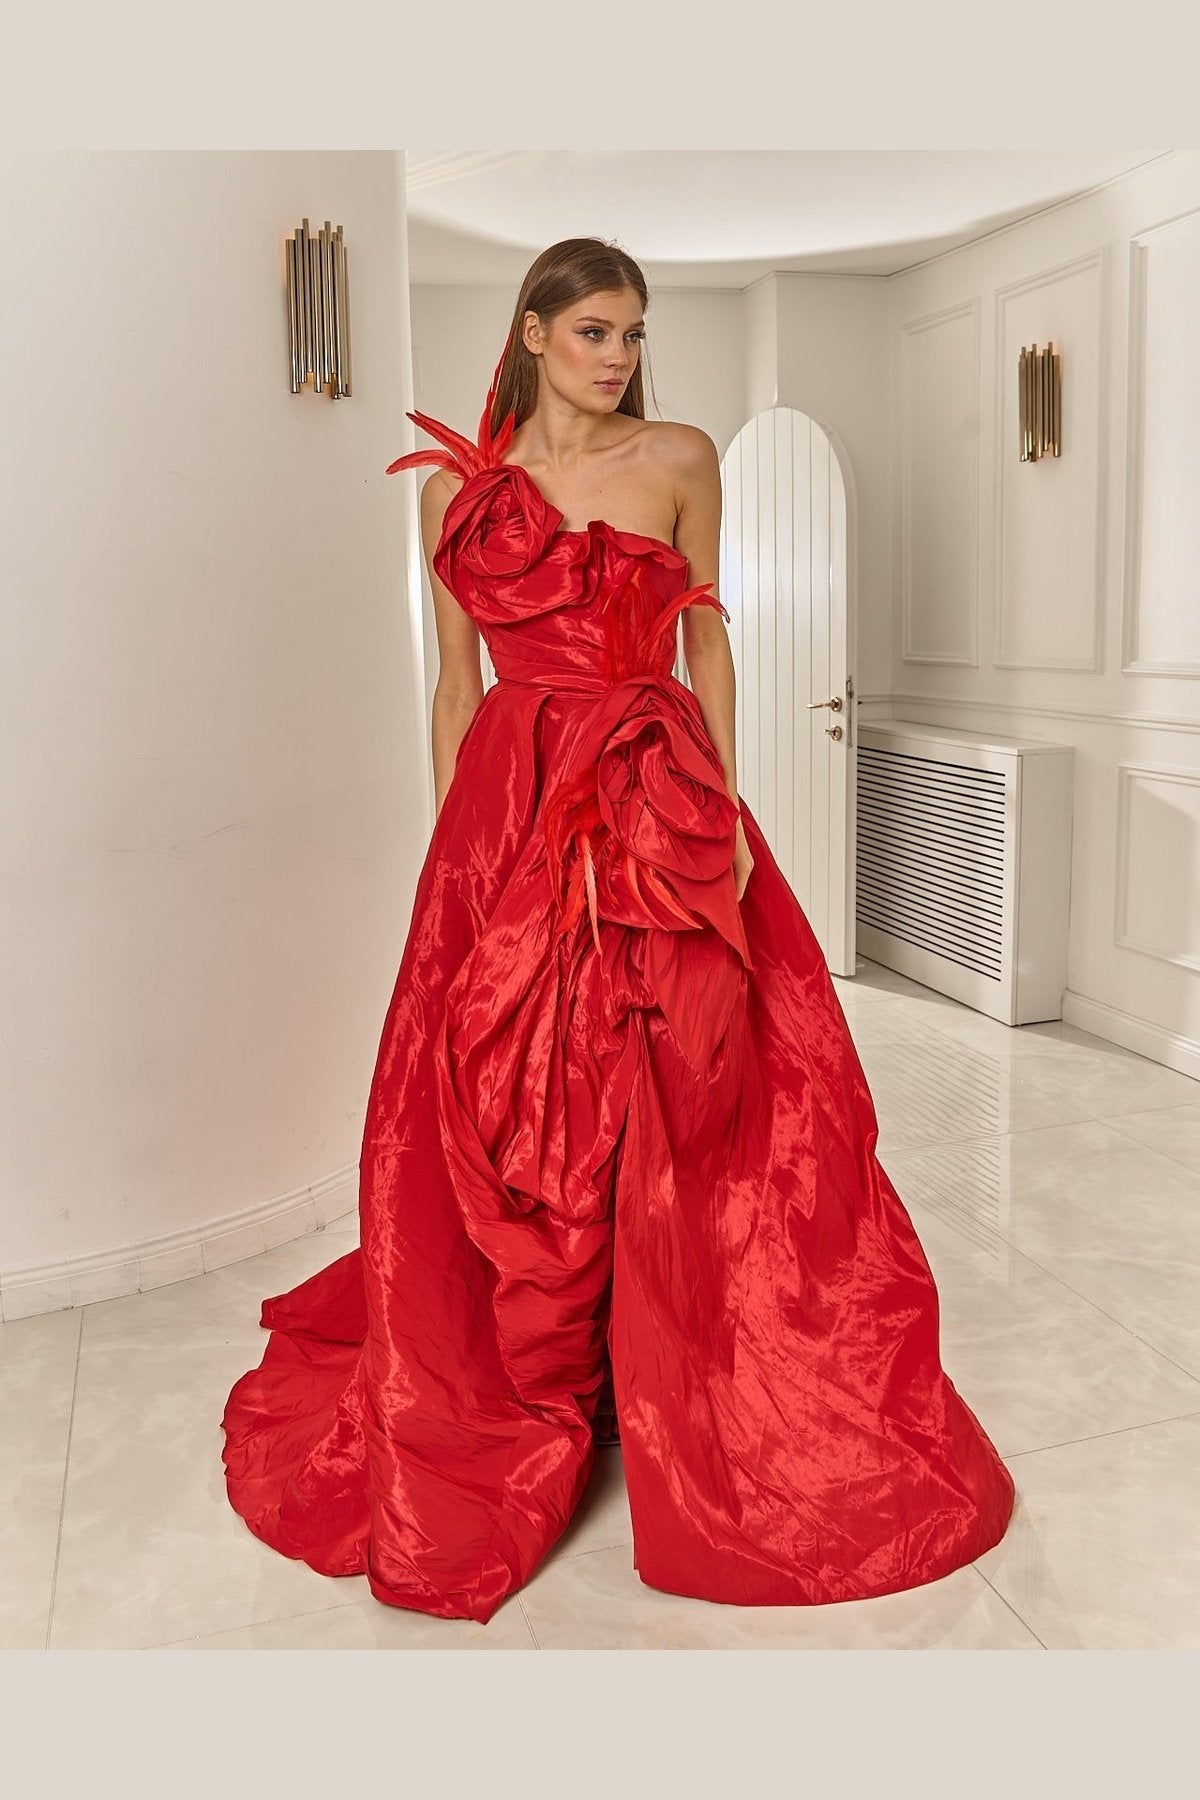 Dixie - Long Puffy Ball Gown with Rose Details in Red